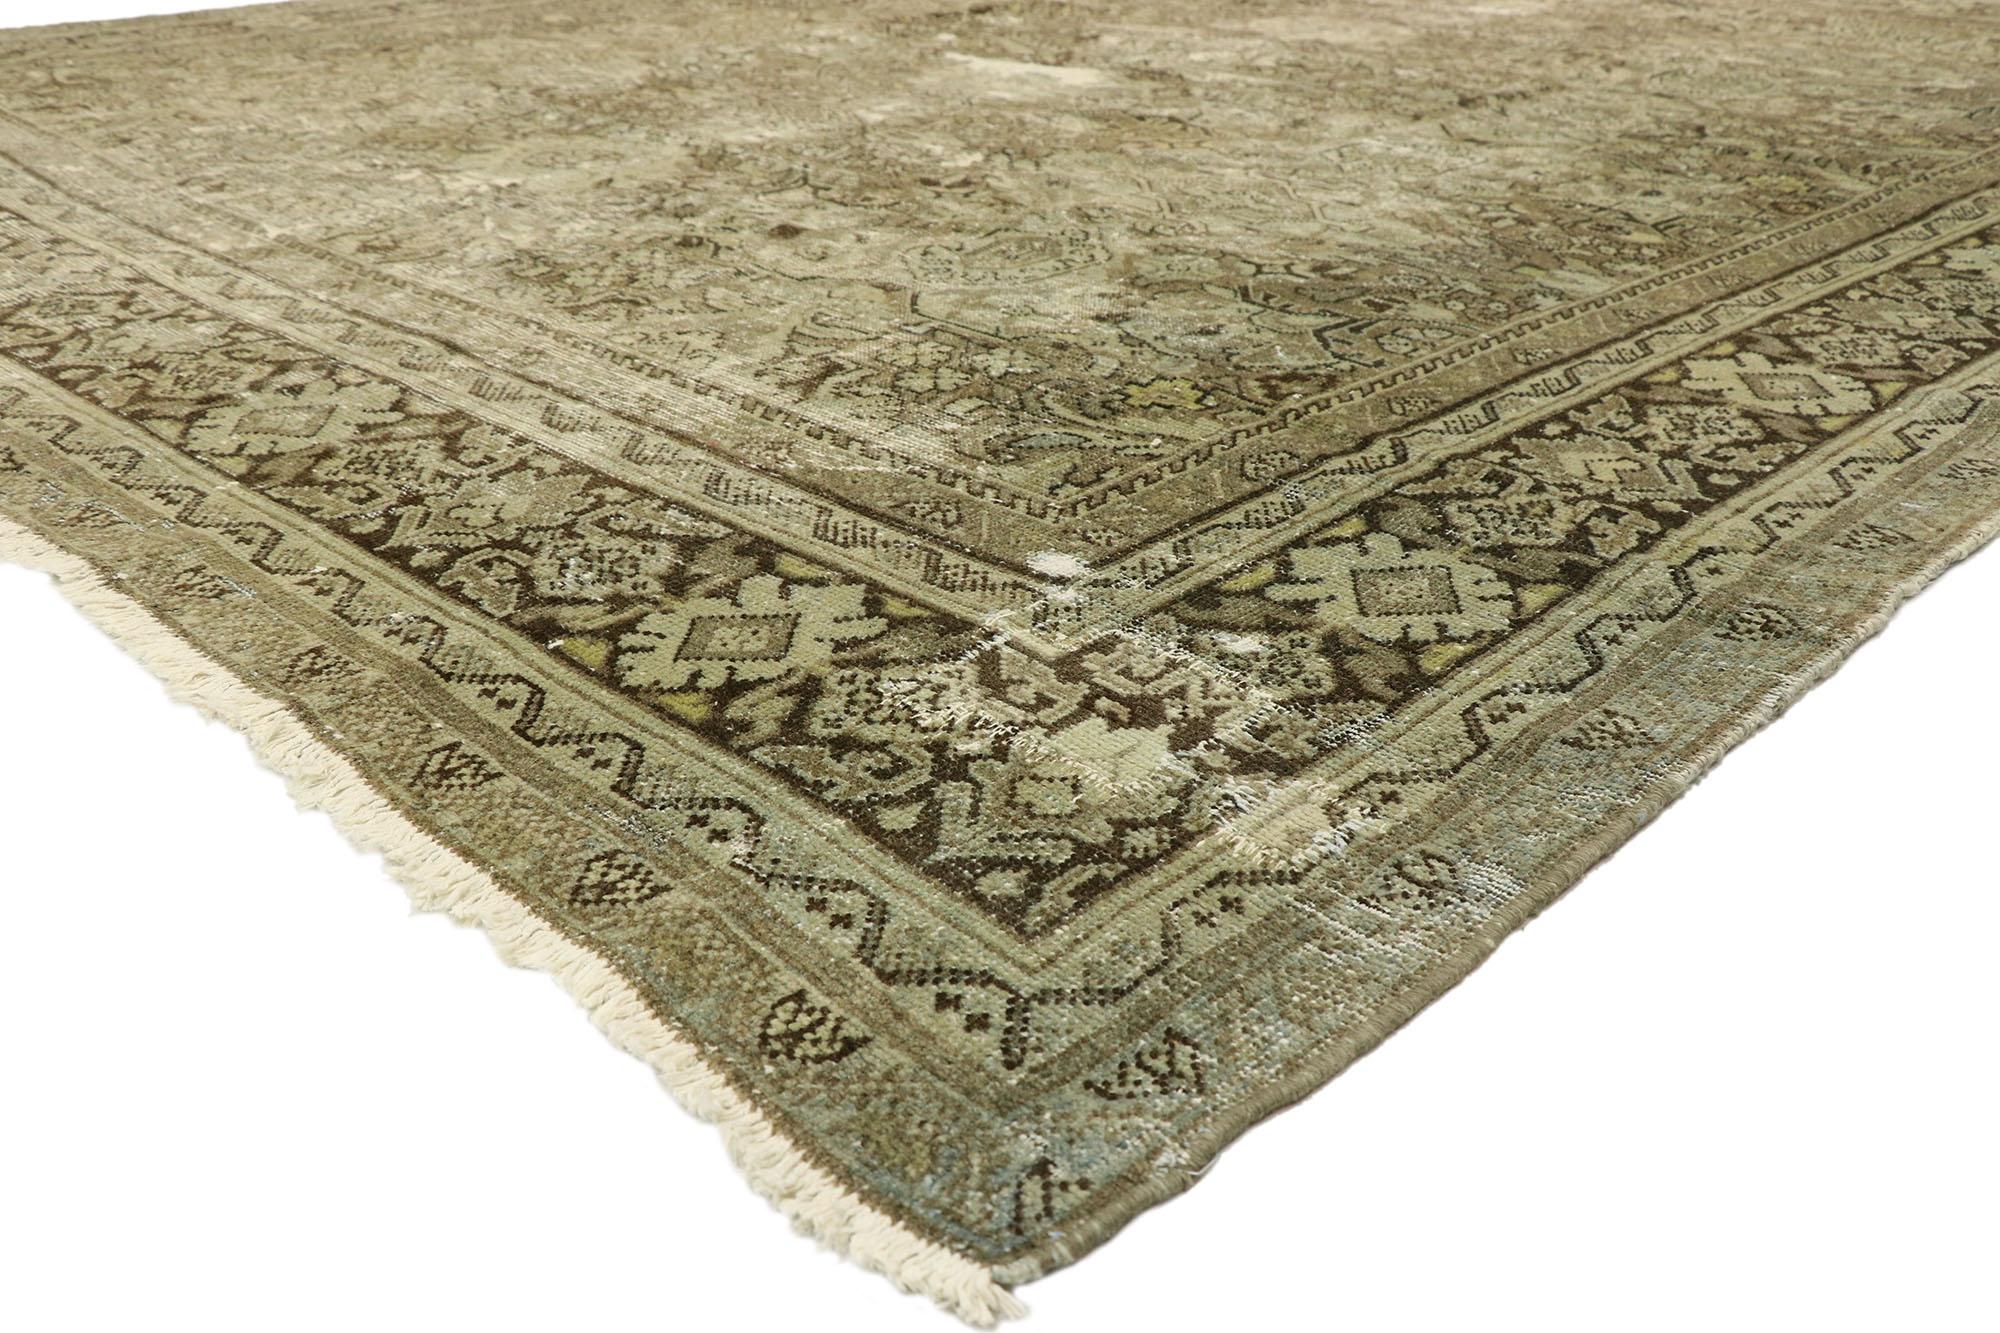 74575 Distressed antique Persian Mahal rug with Modern Rustic English style. With its perfectly worn-in charm and rustic sensibility, this hand knotted wool distressed antique Persian Mahal rug will take on a curated lived-in look that feels